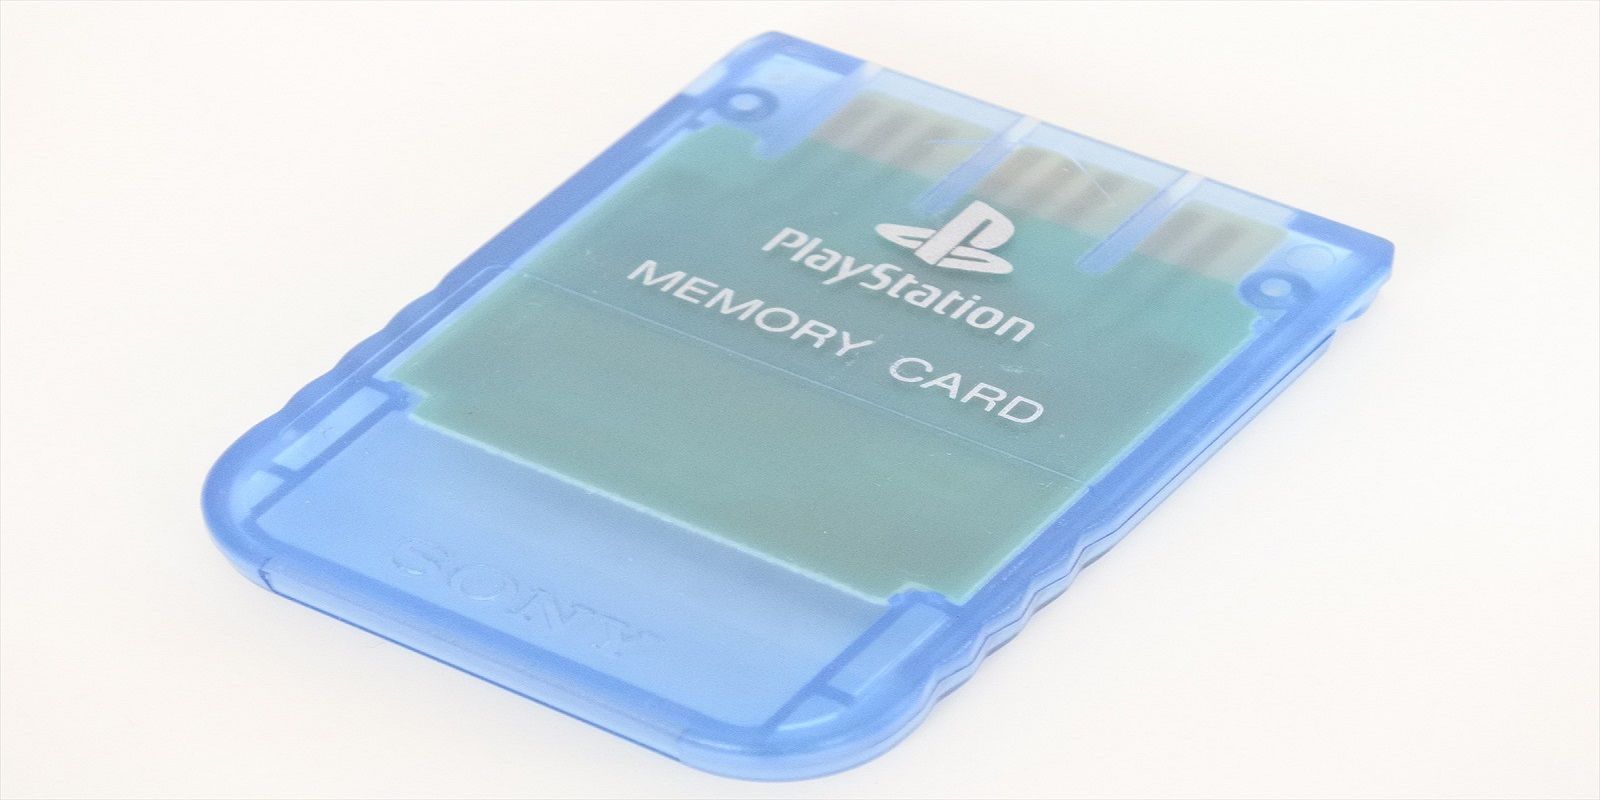 A translucent Playstation memory card